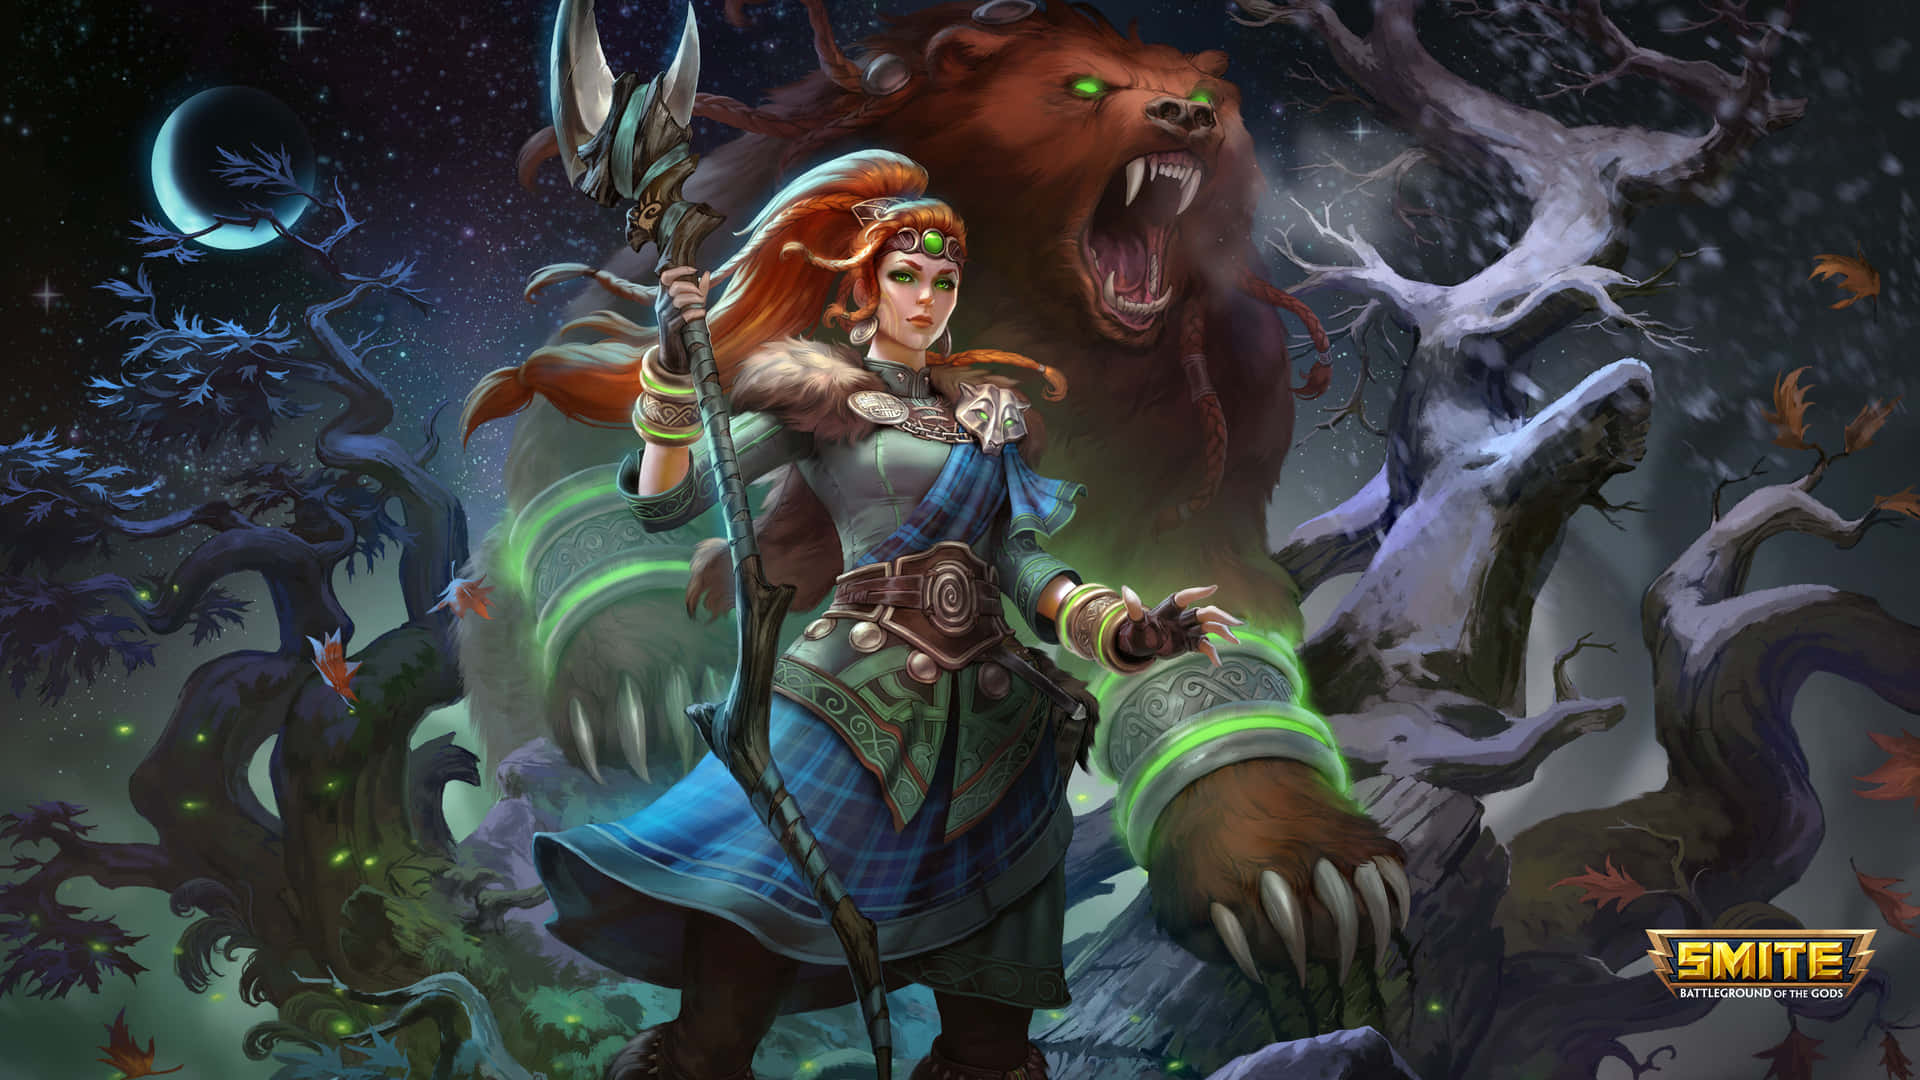 Compete in epic battles and claim Goddesses' powers in Smite Wallpaper